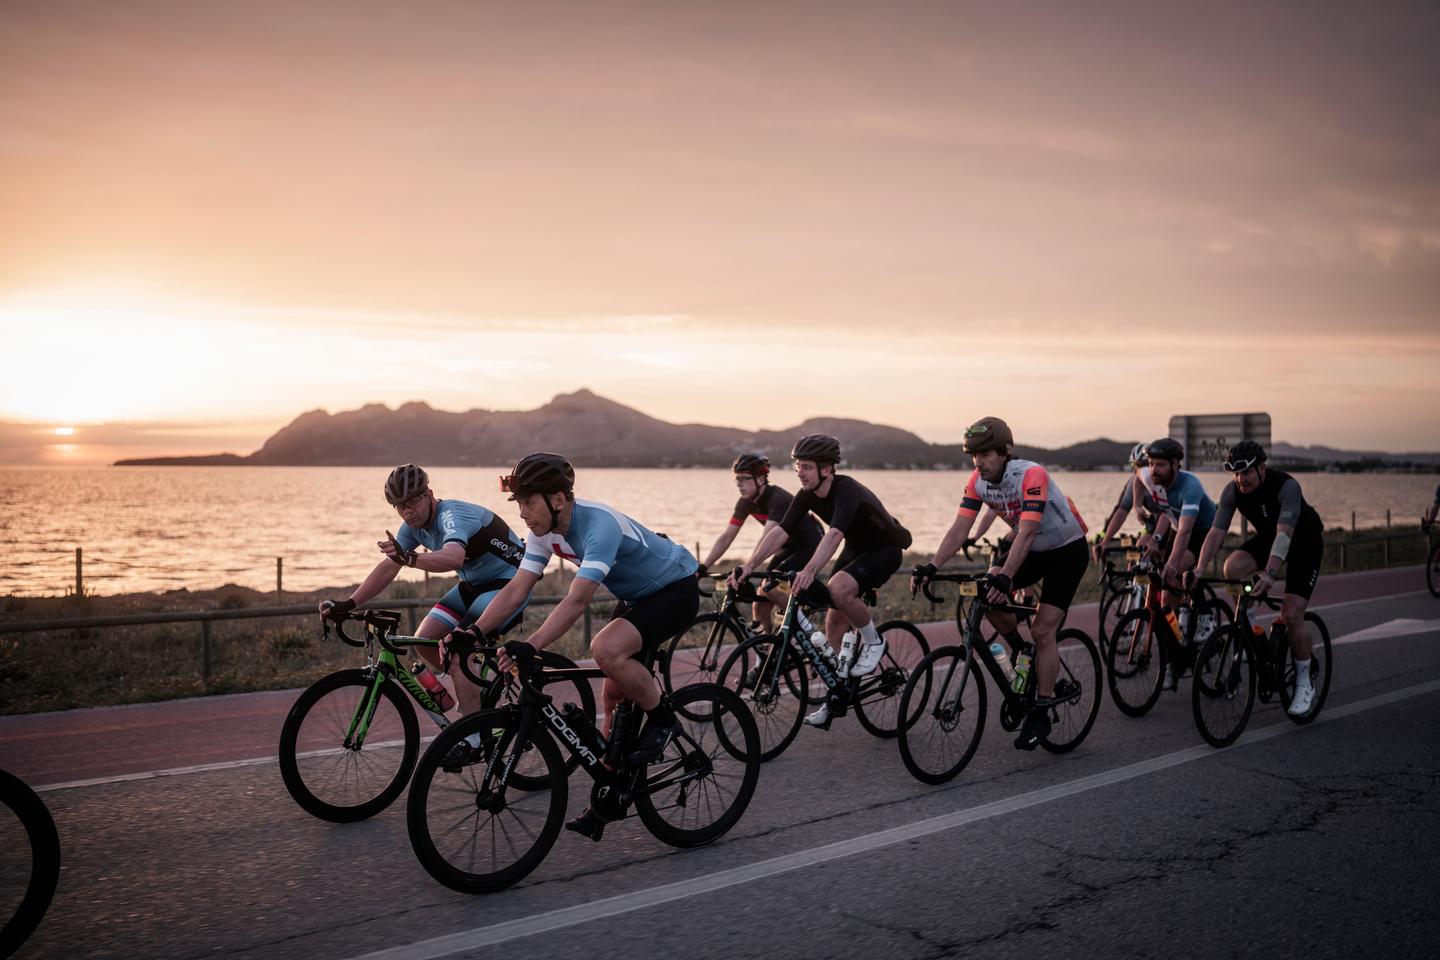 Group of cyclists riding along a coastal road at sunset, with mountains and the sea in the background. The sky is painted with warm colors, creating a serene and picturesque scene.